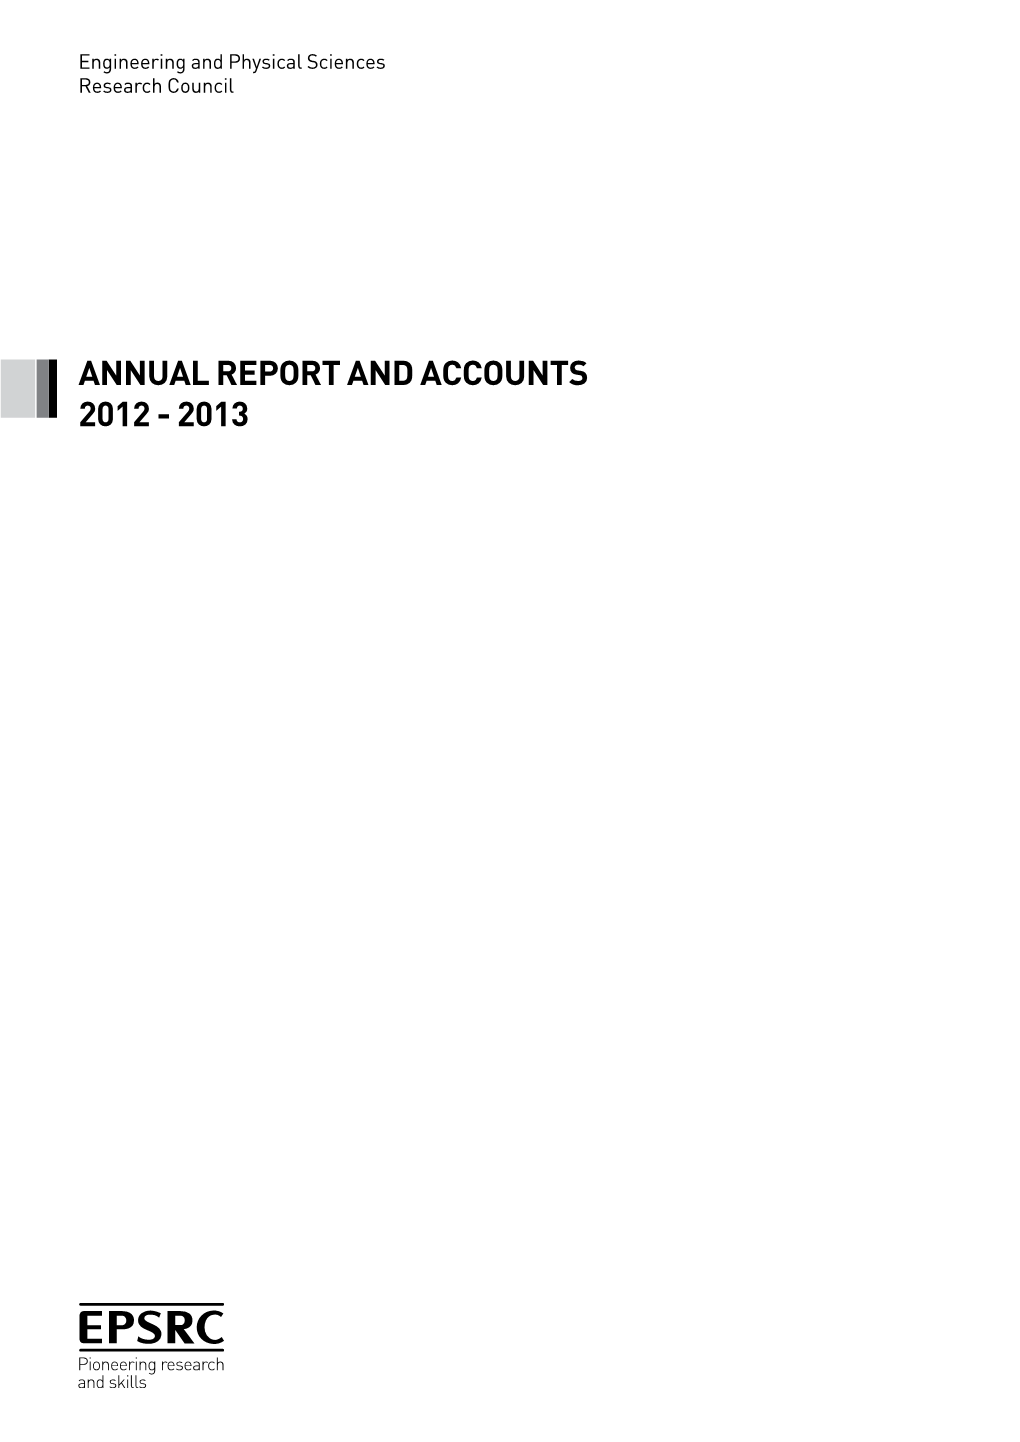 Engineering and Physical Sciences Research Council Annual Report and Accounts 2012-2013